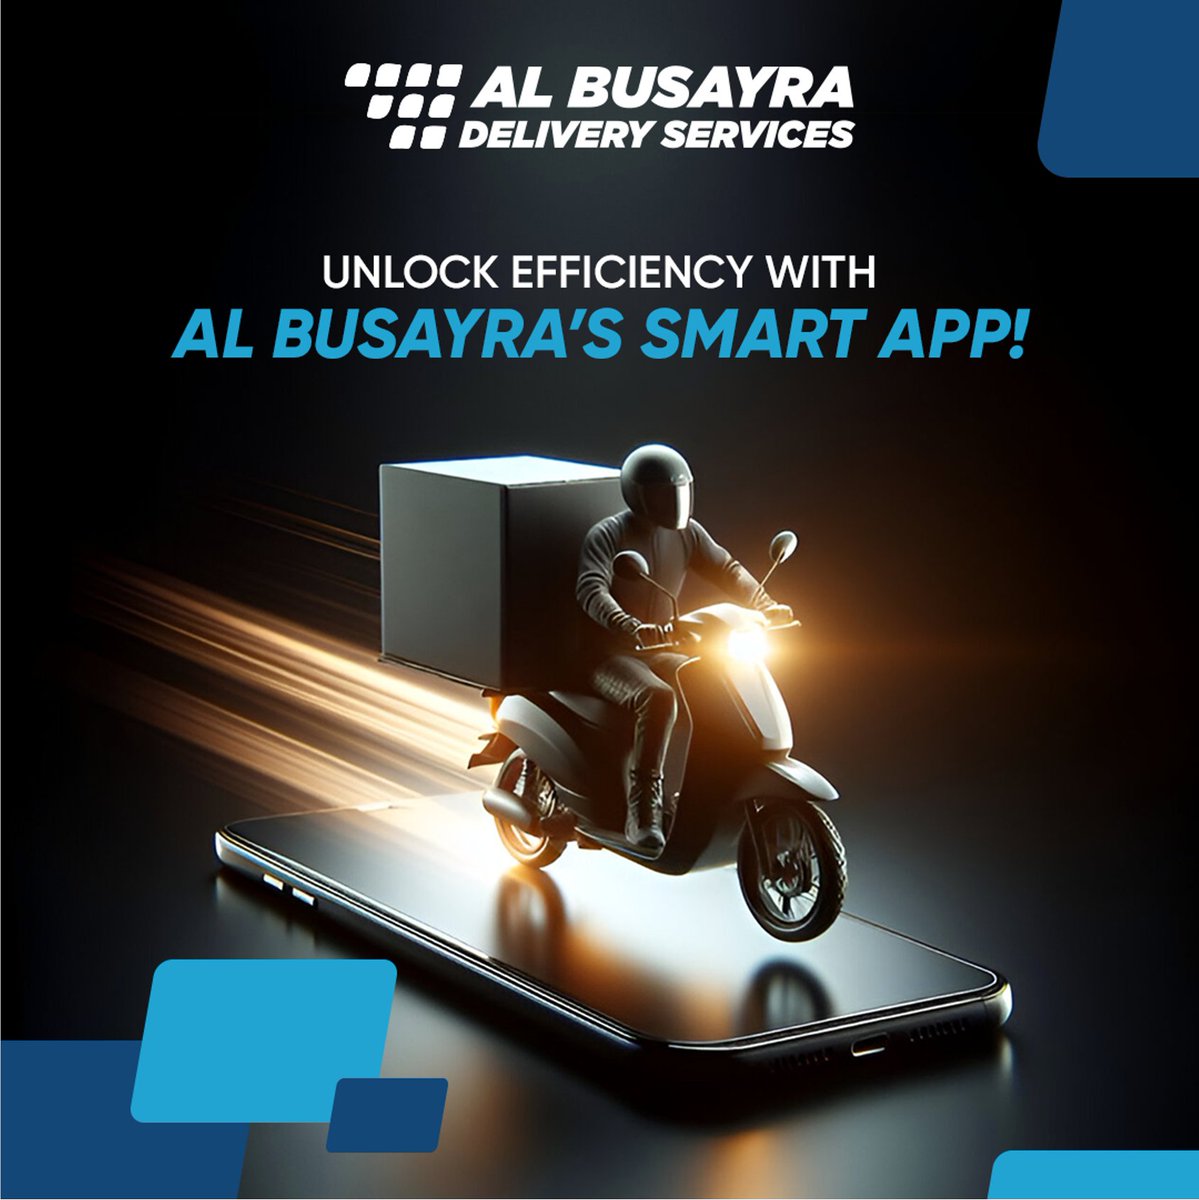 Monitor your deliveries in real-time and make data-driven decisions to enhance your logistics operations. Learn how our innovative technology can transform your business at al-busayradelivery.com or contact us on WhatsApp at +971 50 387 5199 for a demo. #SmartLogistics